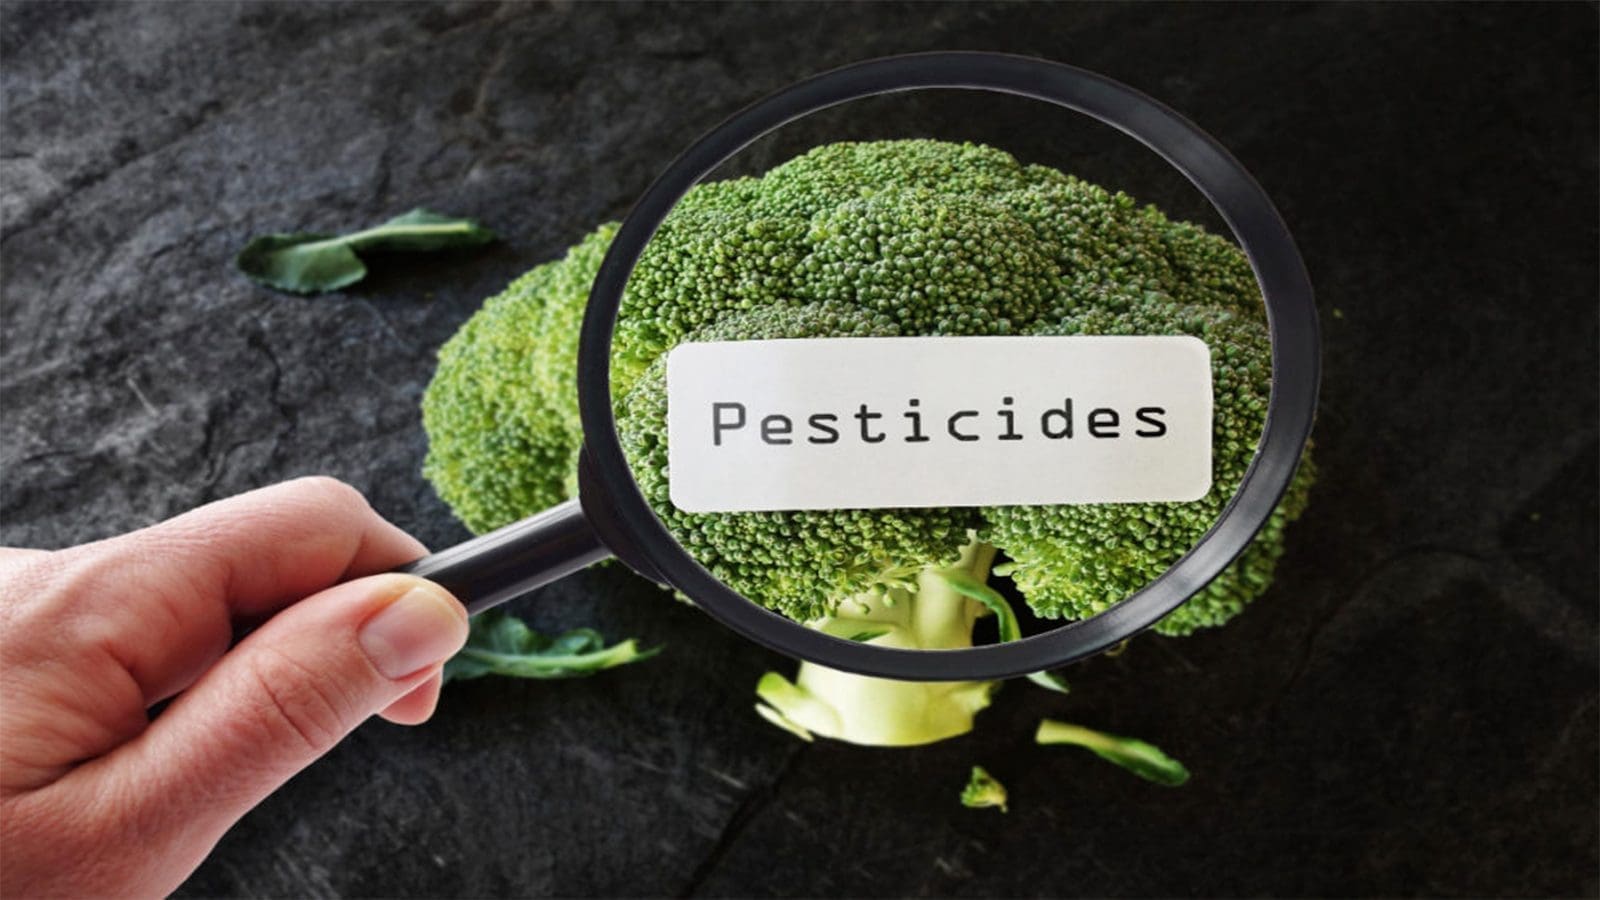 Health Canada initiates science-based evaluation to set maximum residue limits for pesticides in foods